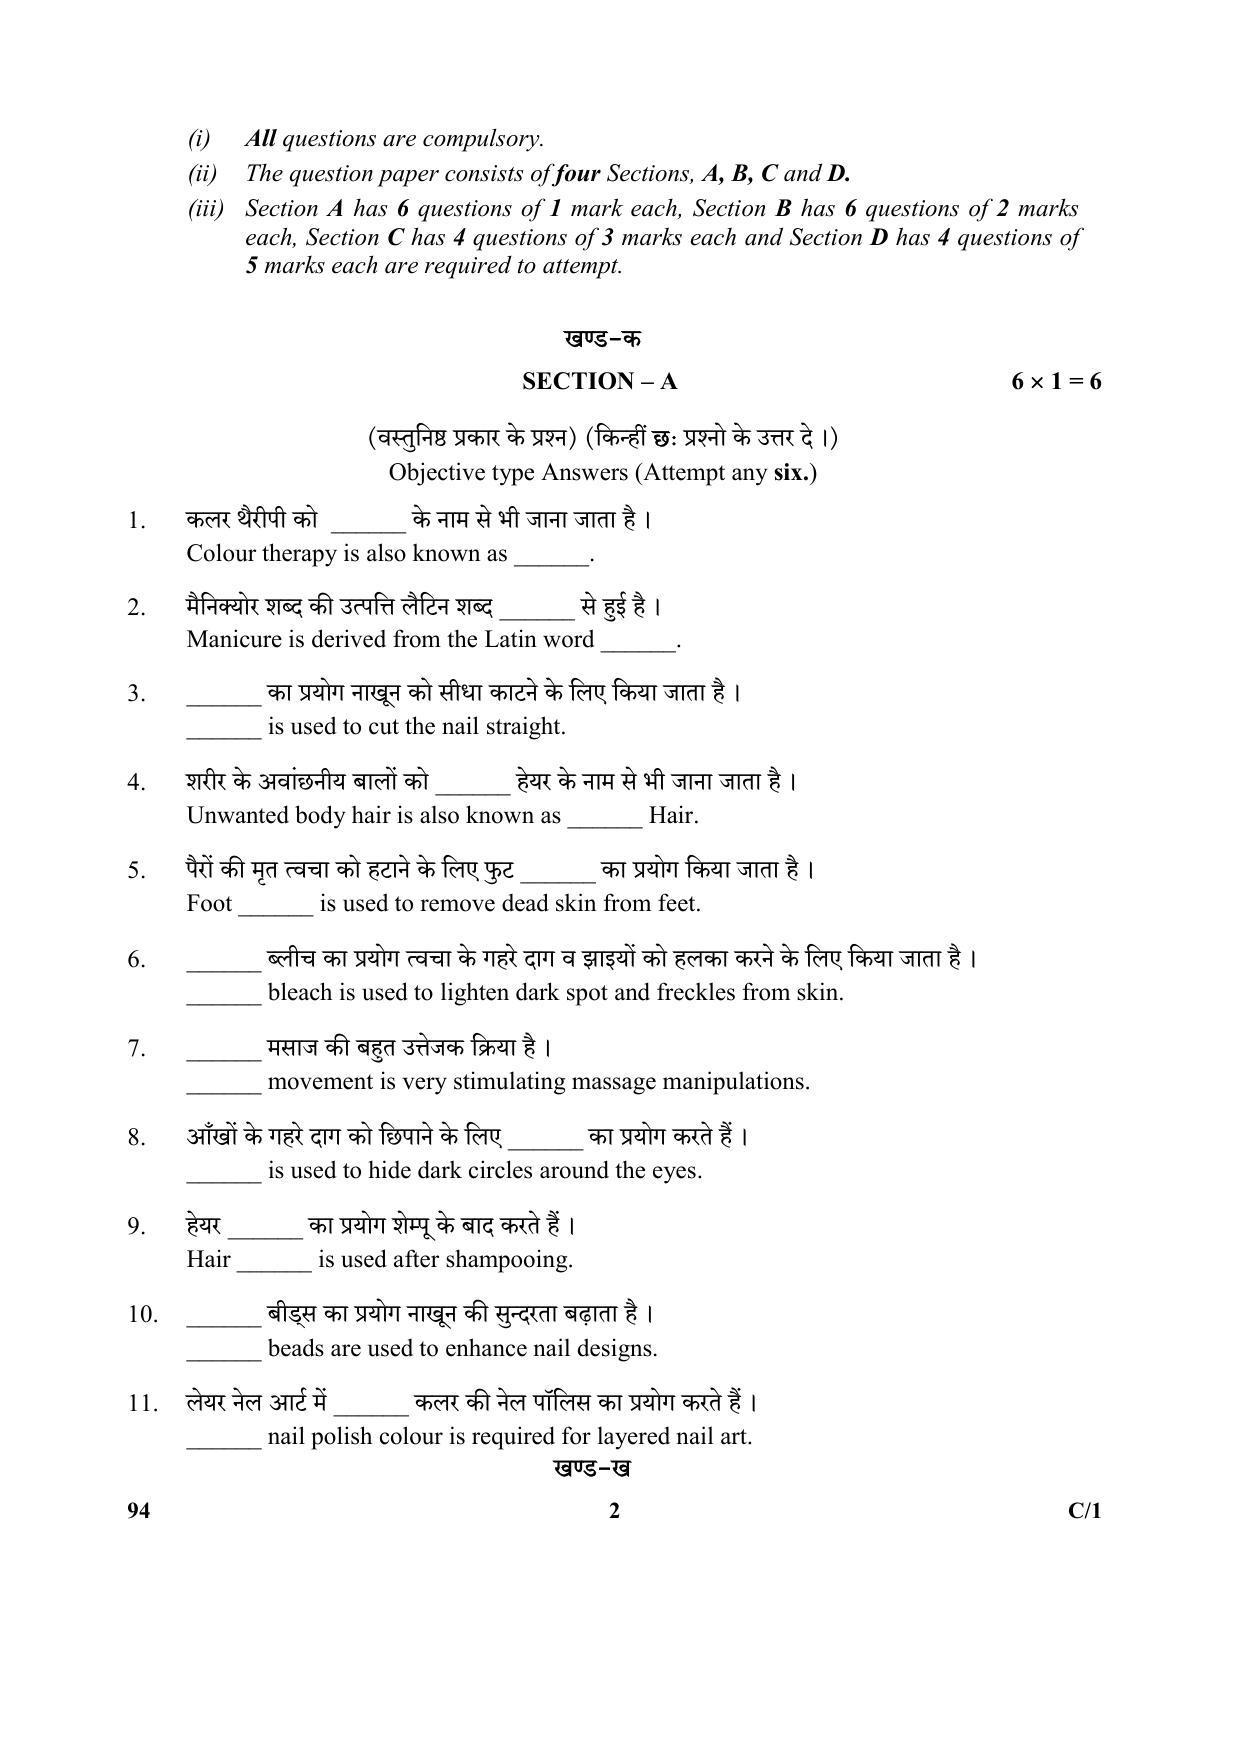 CBSE Class 10 94 (Beauty And Wellness) 2018 Compartment Question Paper - Page 2